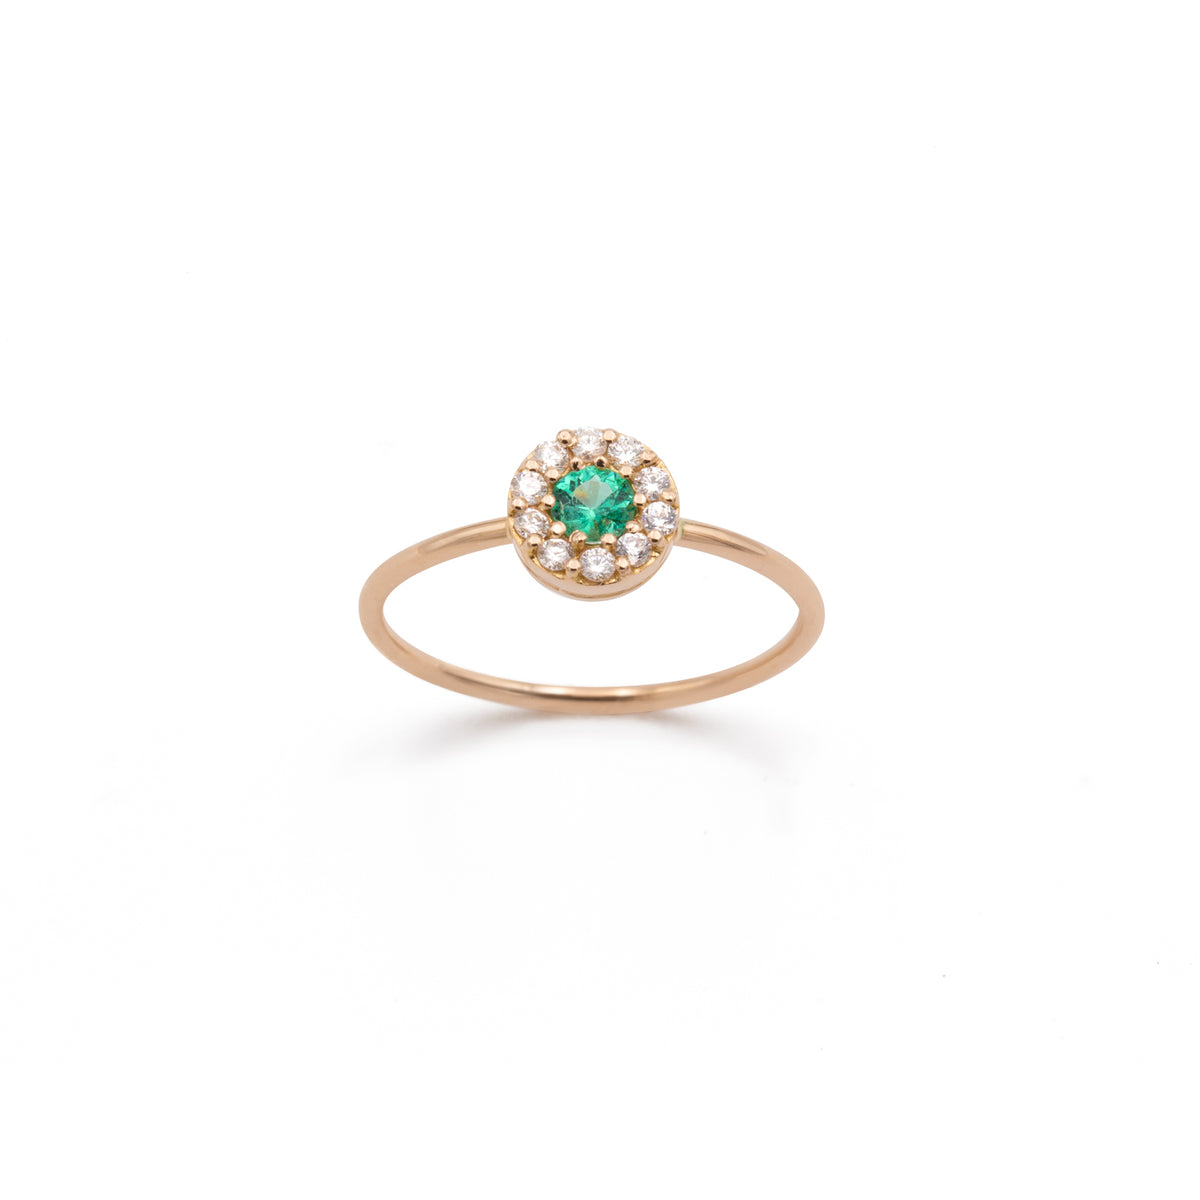 Thin rose gold ring with diamond and emerald ring